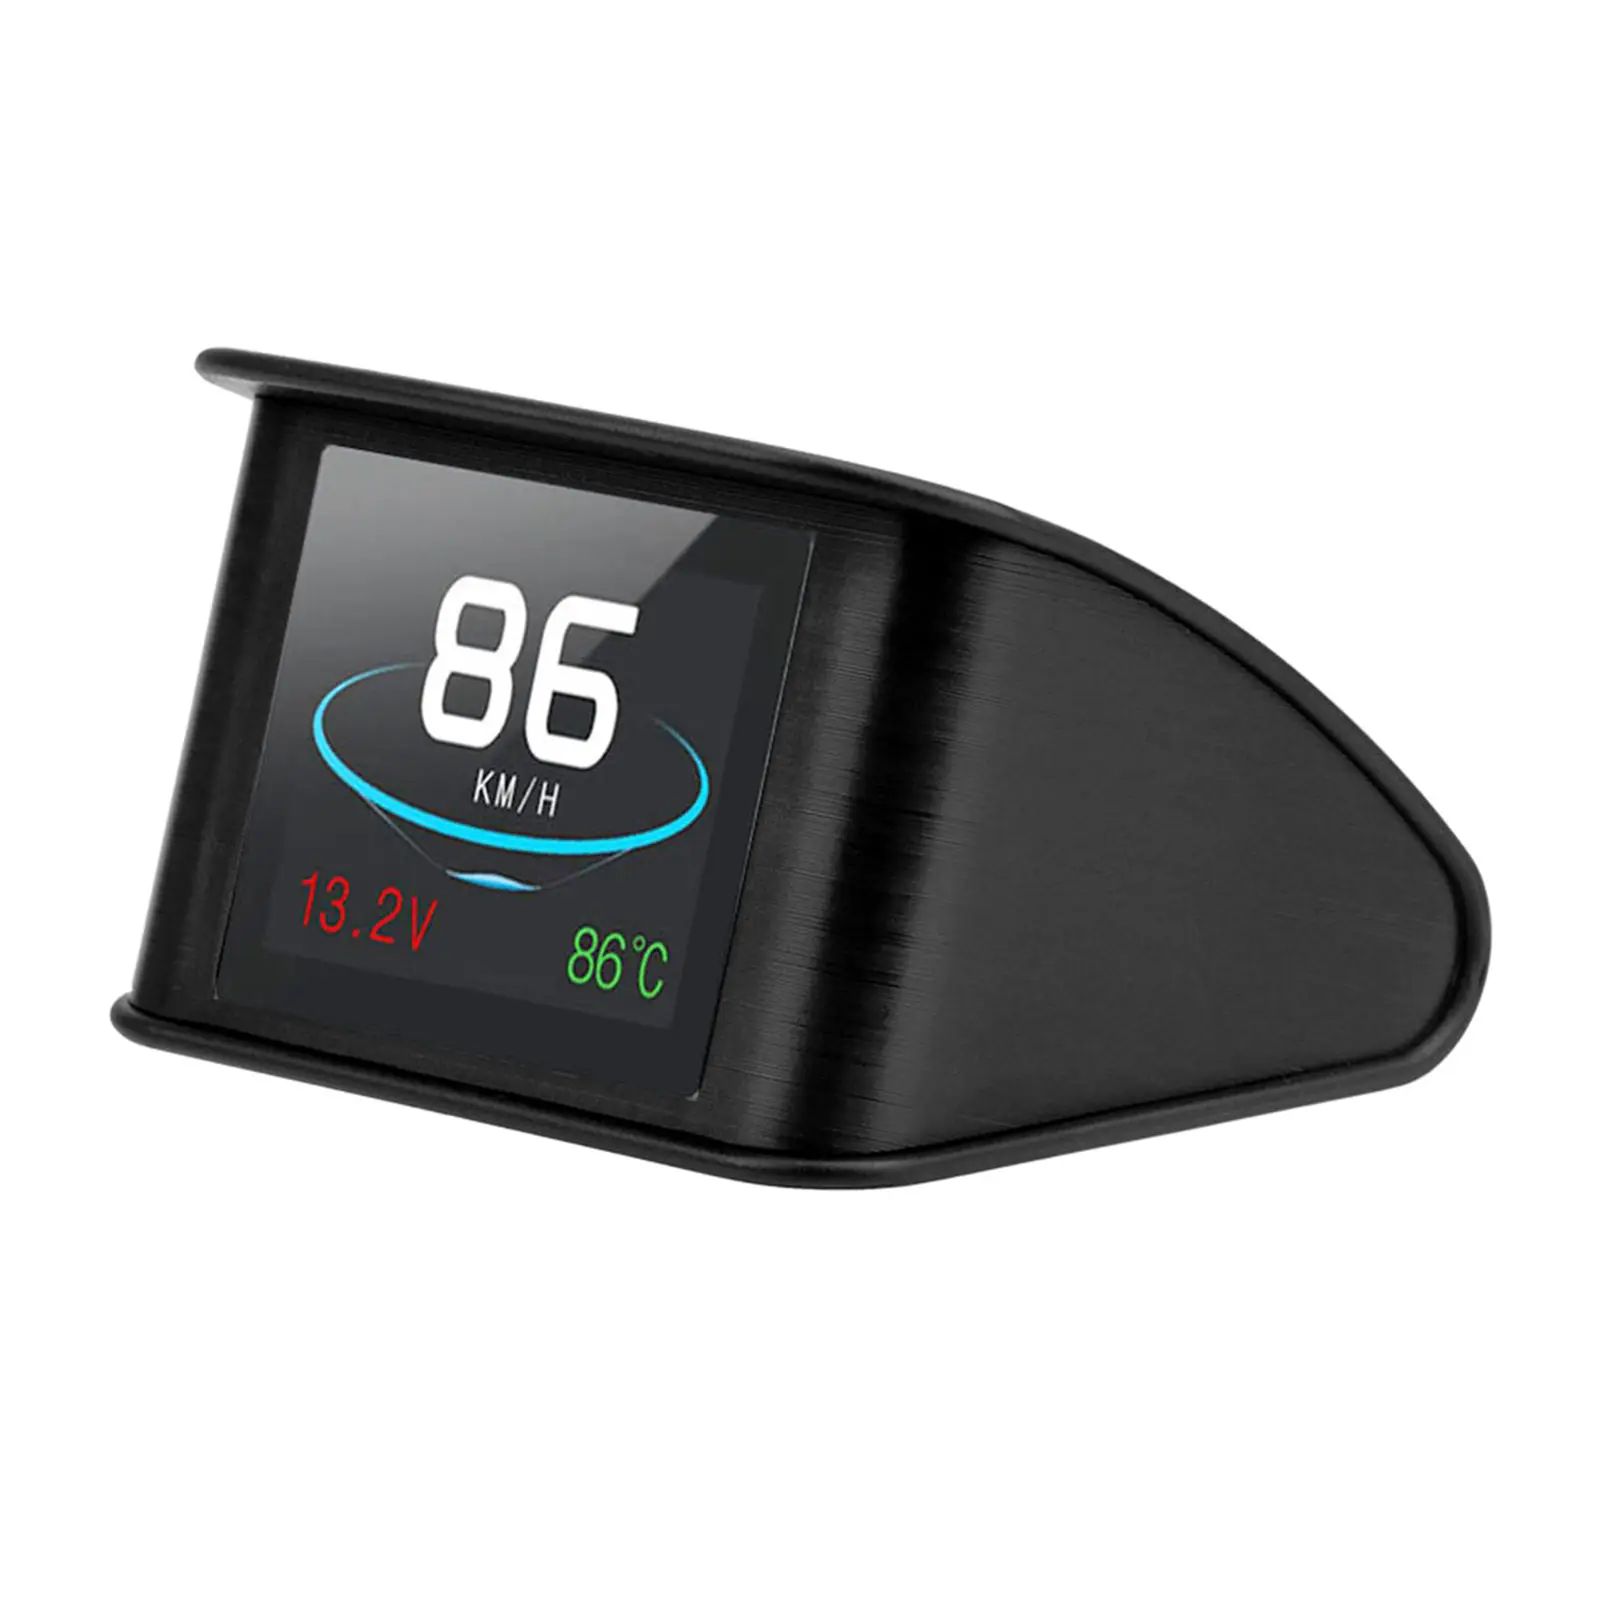 HUD LCD Screen Car Head Up Display w/GPS Navigation OverSpeed Alarm Voltmeter Warning for All Vehicle